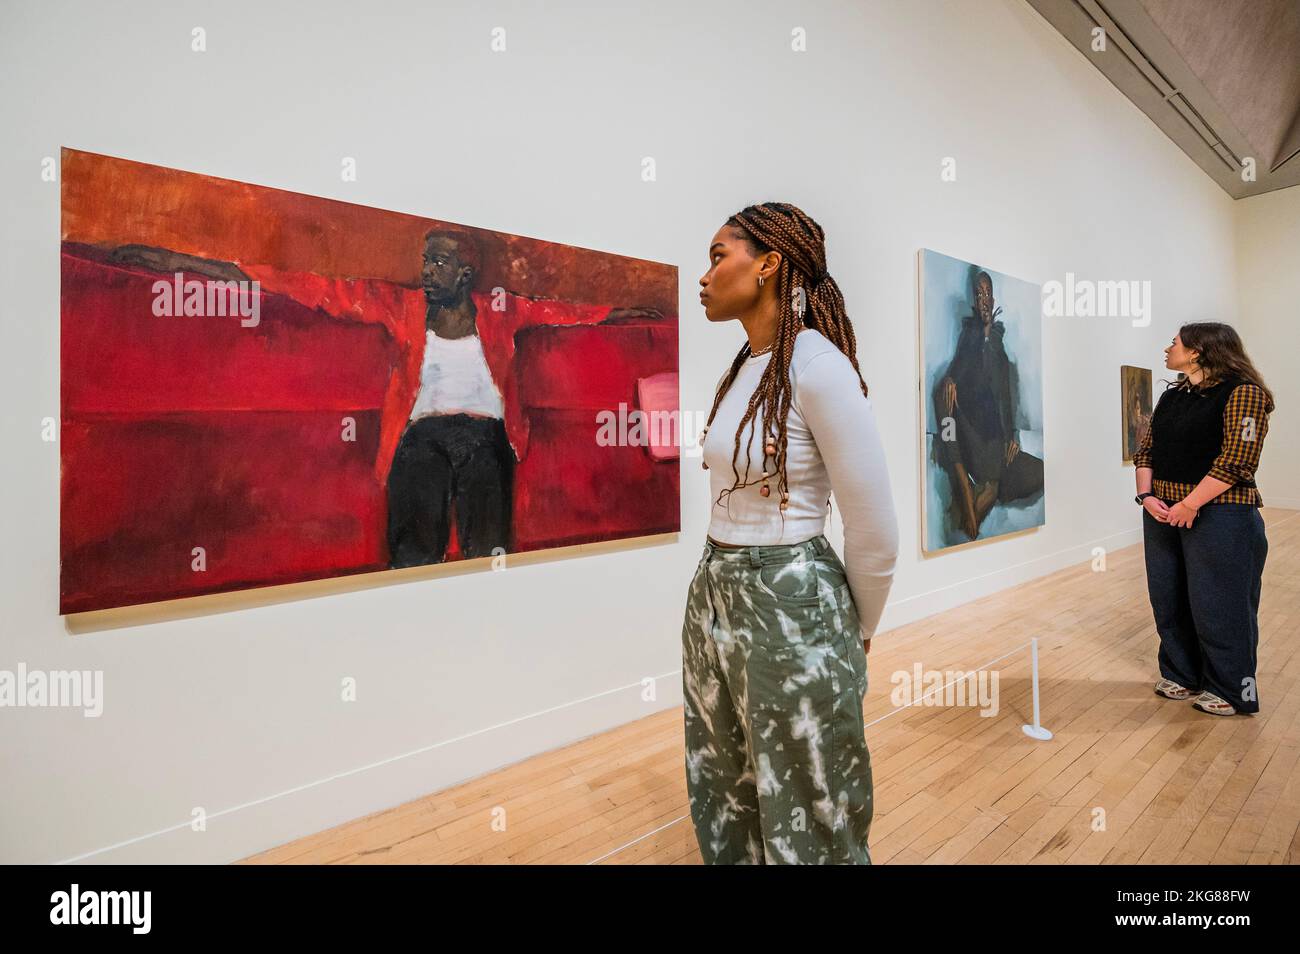 London, UK. 22nd Nov, 2022. The Ventricular, 2018 with Nightjar, 2022, one of her 3 new works, in the background - Fly in League with the Night - A survey exhibition of British artist Lynette Yiadom-Boakye at Tate Britain. Widely considered to be one of the most important painters working today, she is known for her eingmatic and atmospheric paintings depicting human subjects crafted from her own imagination. Credit: Guy Bell/Alamy Live News Stock Photo